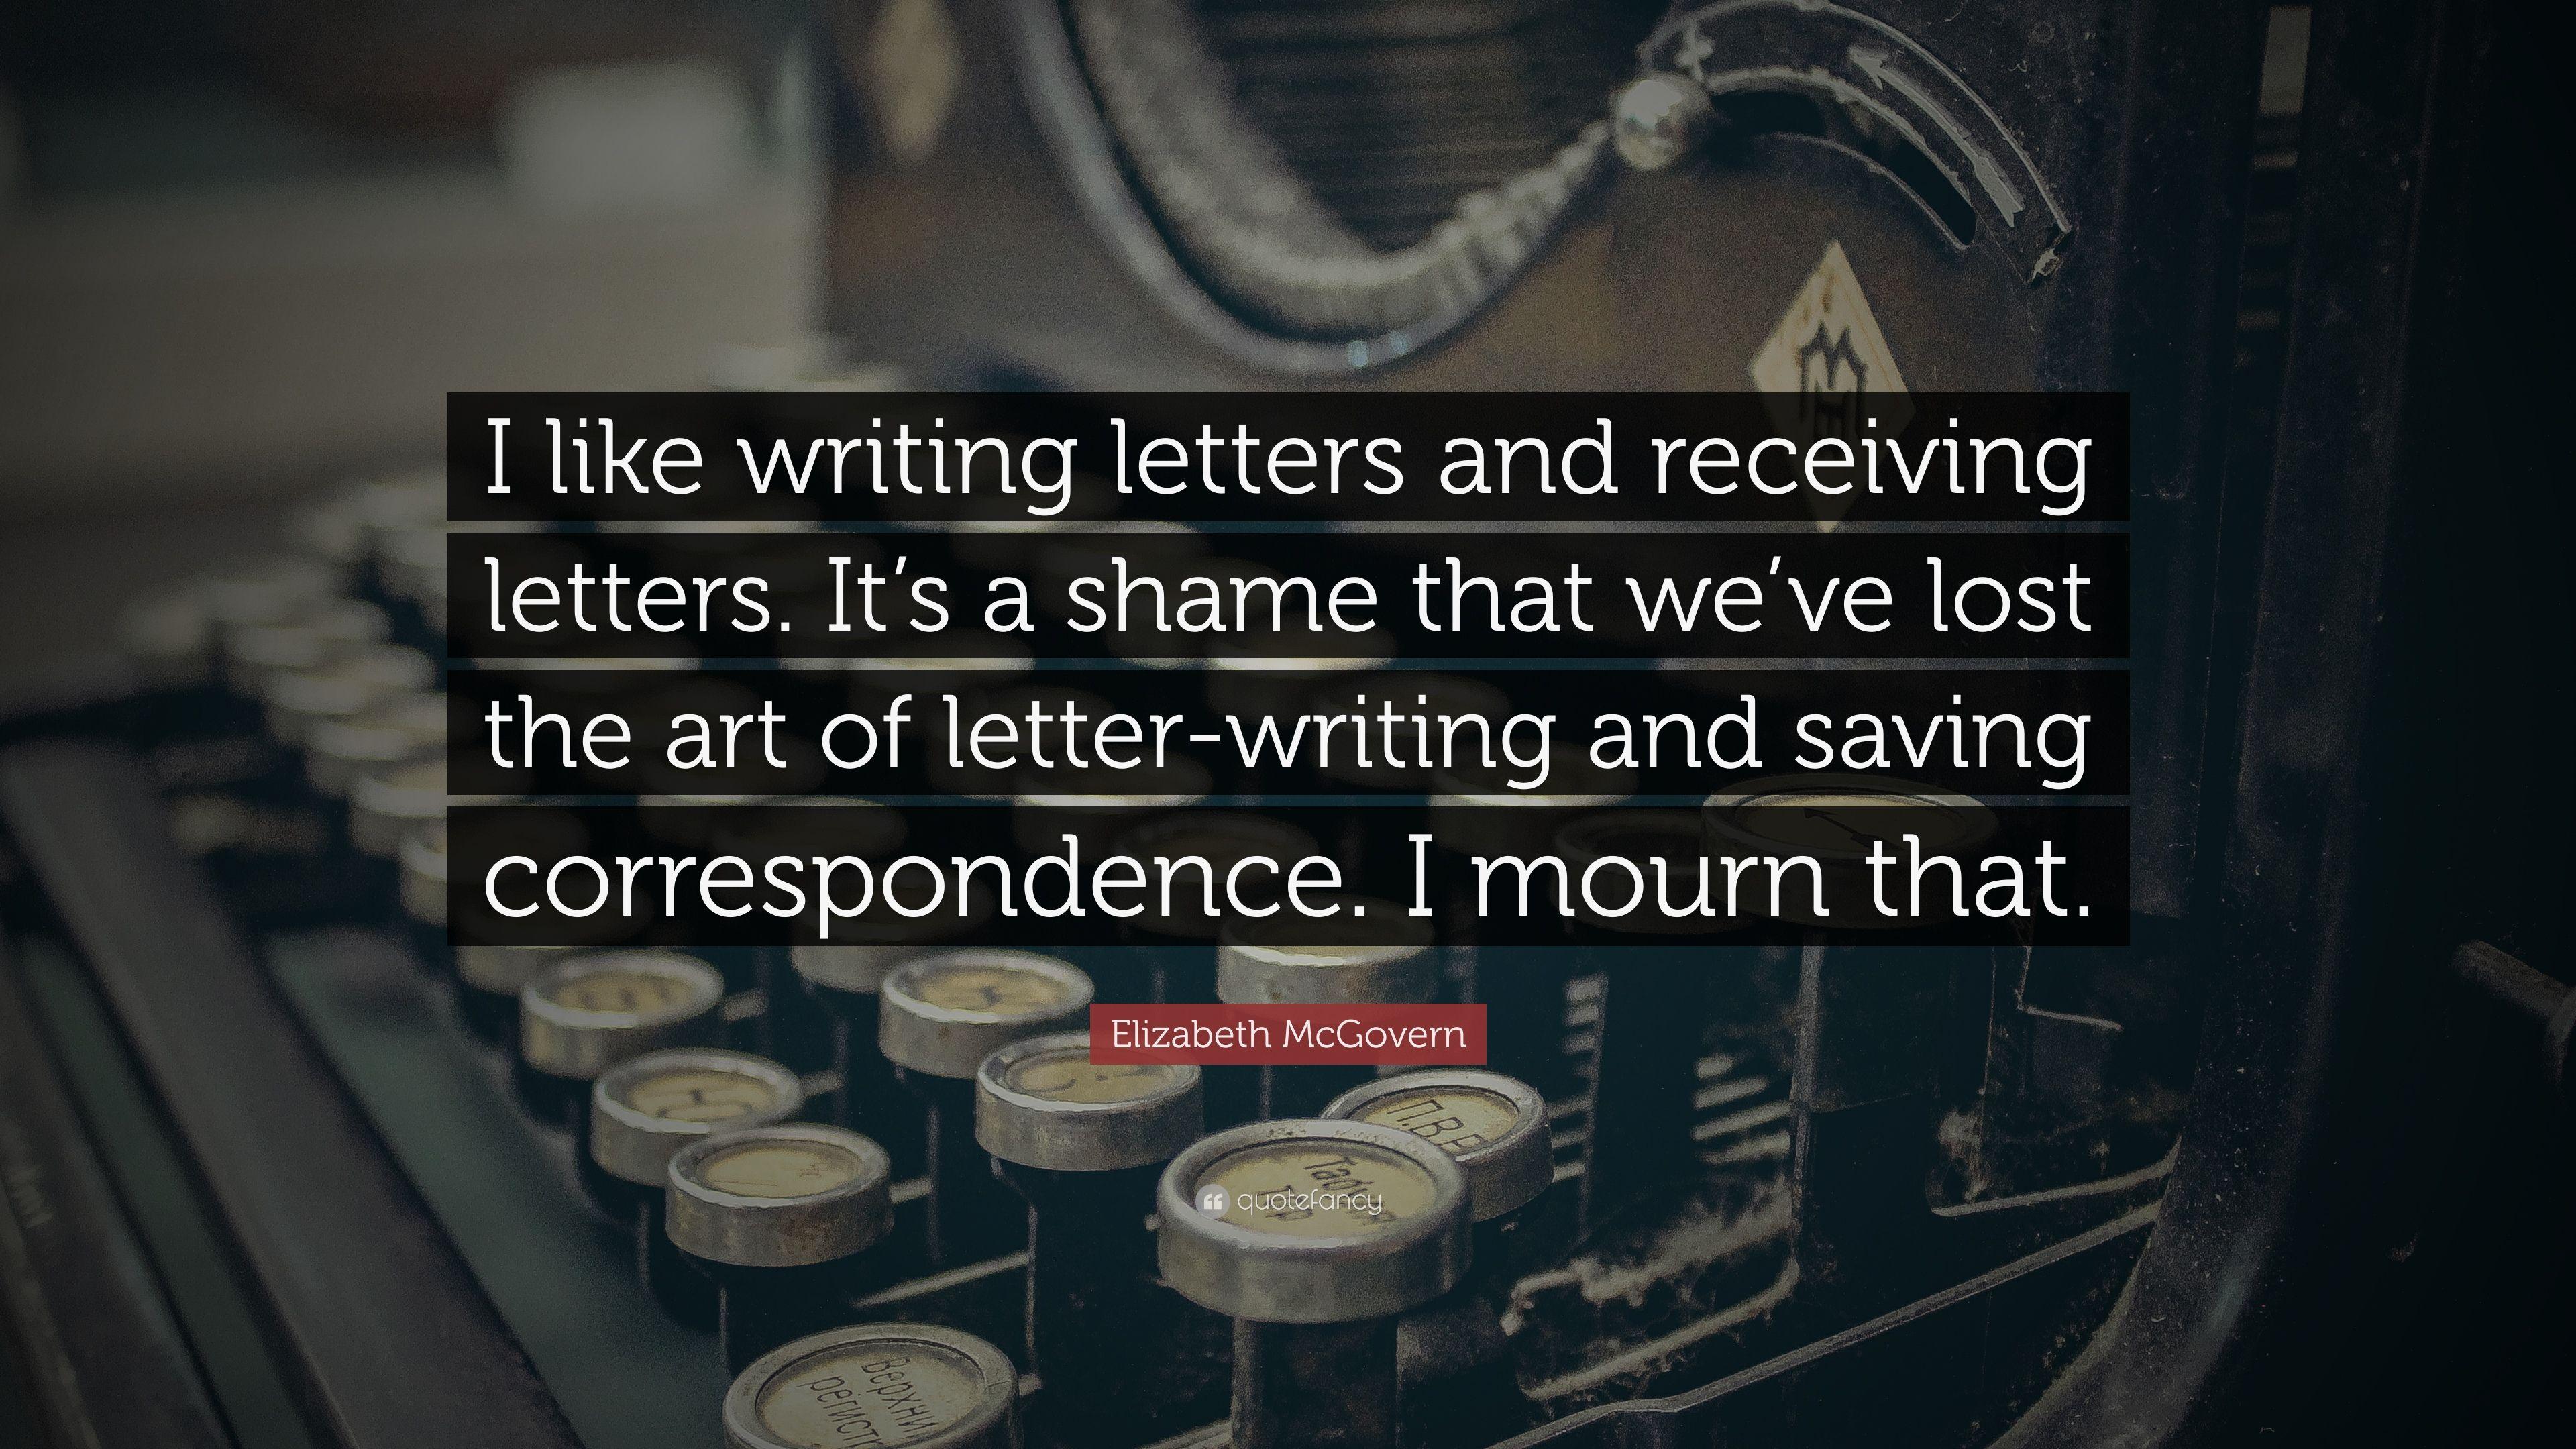 Elizabeth McGovern Quote: “I like writing letters and receiving